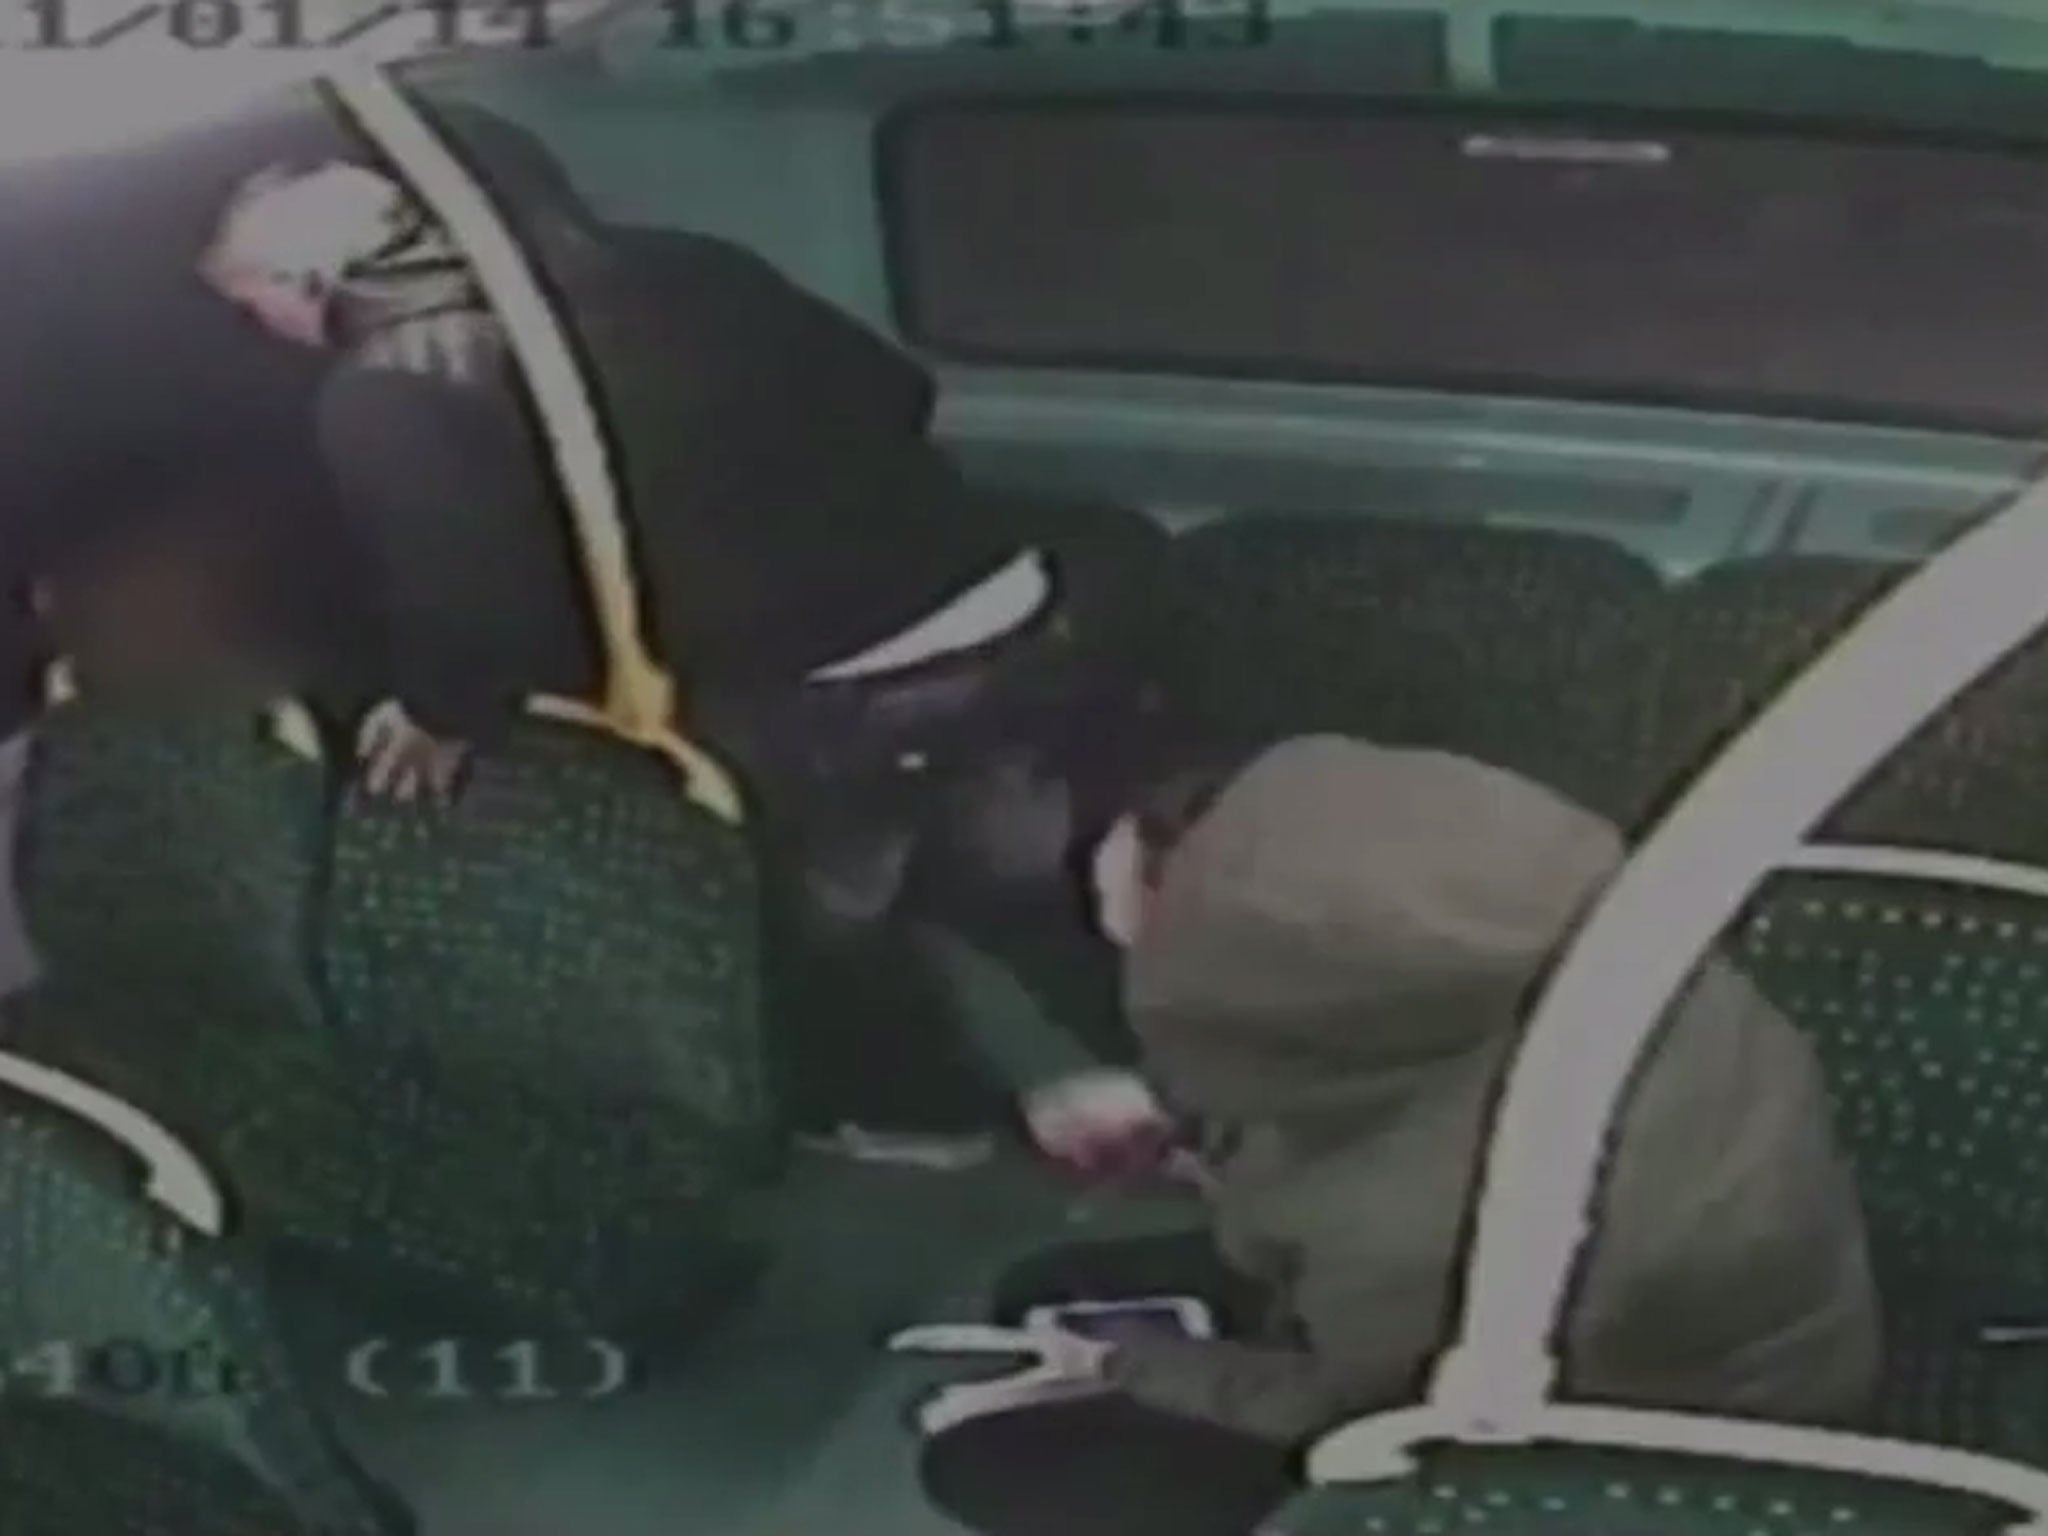 Police in Birmingham are appealing for witnesses after CCTV footage showed a 'barbaric' pepper spray attack on a bus